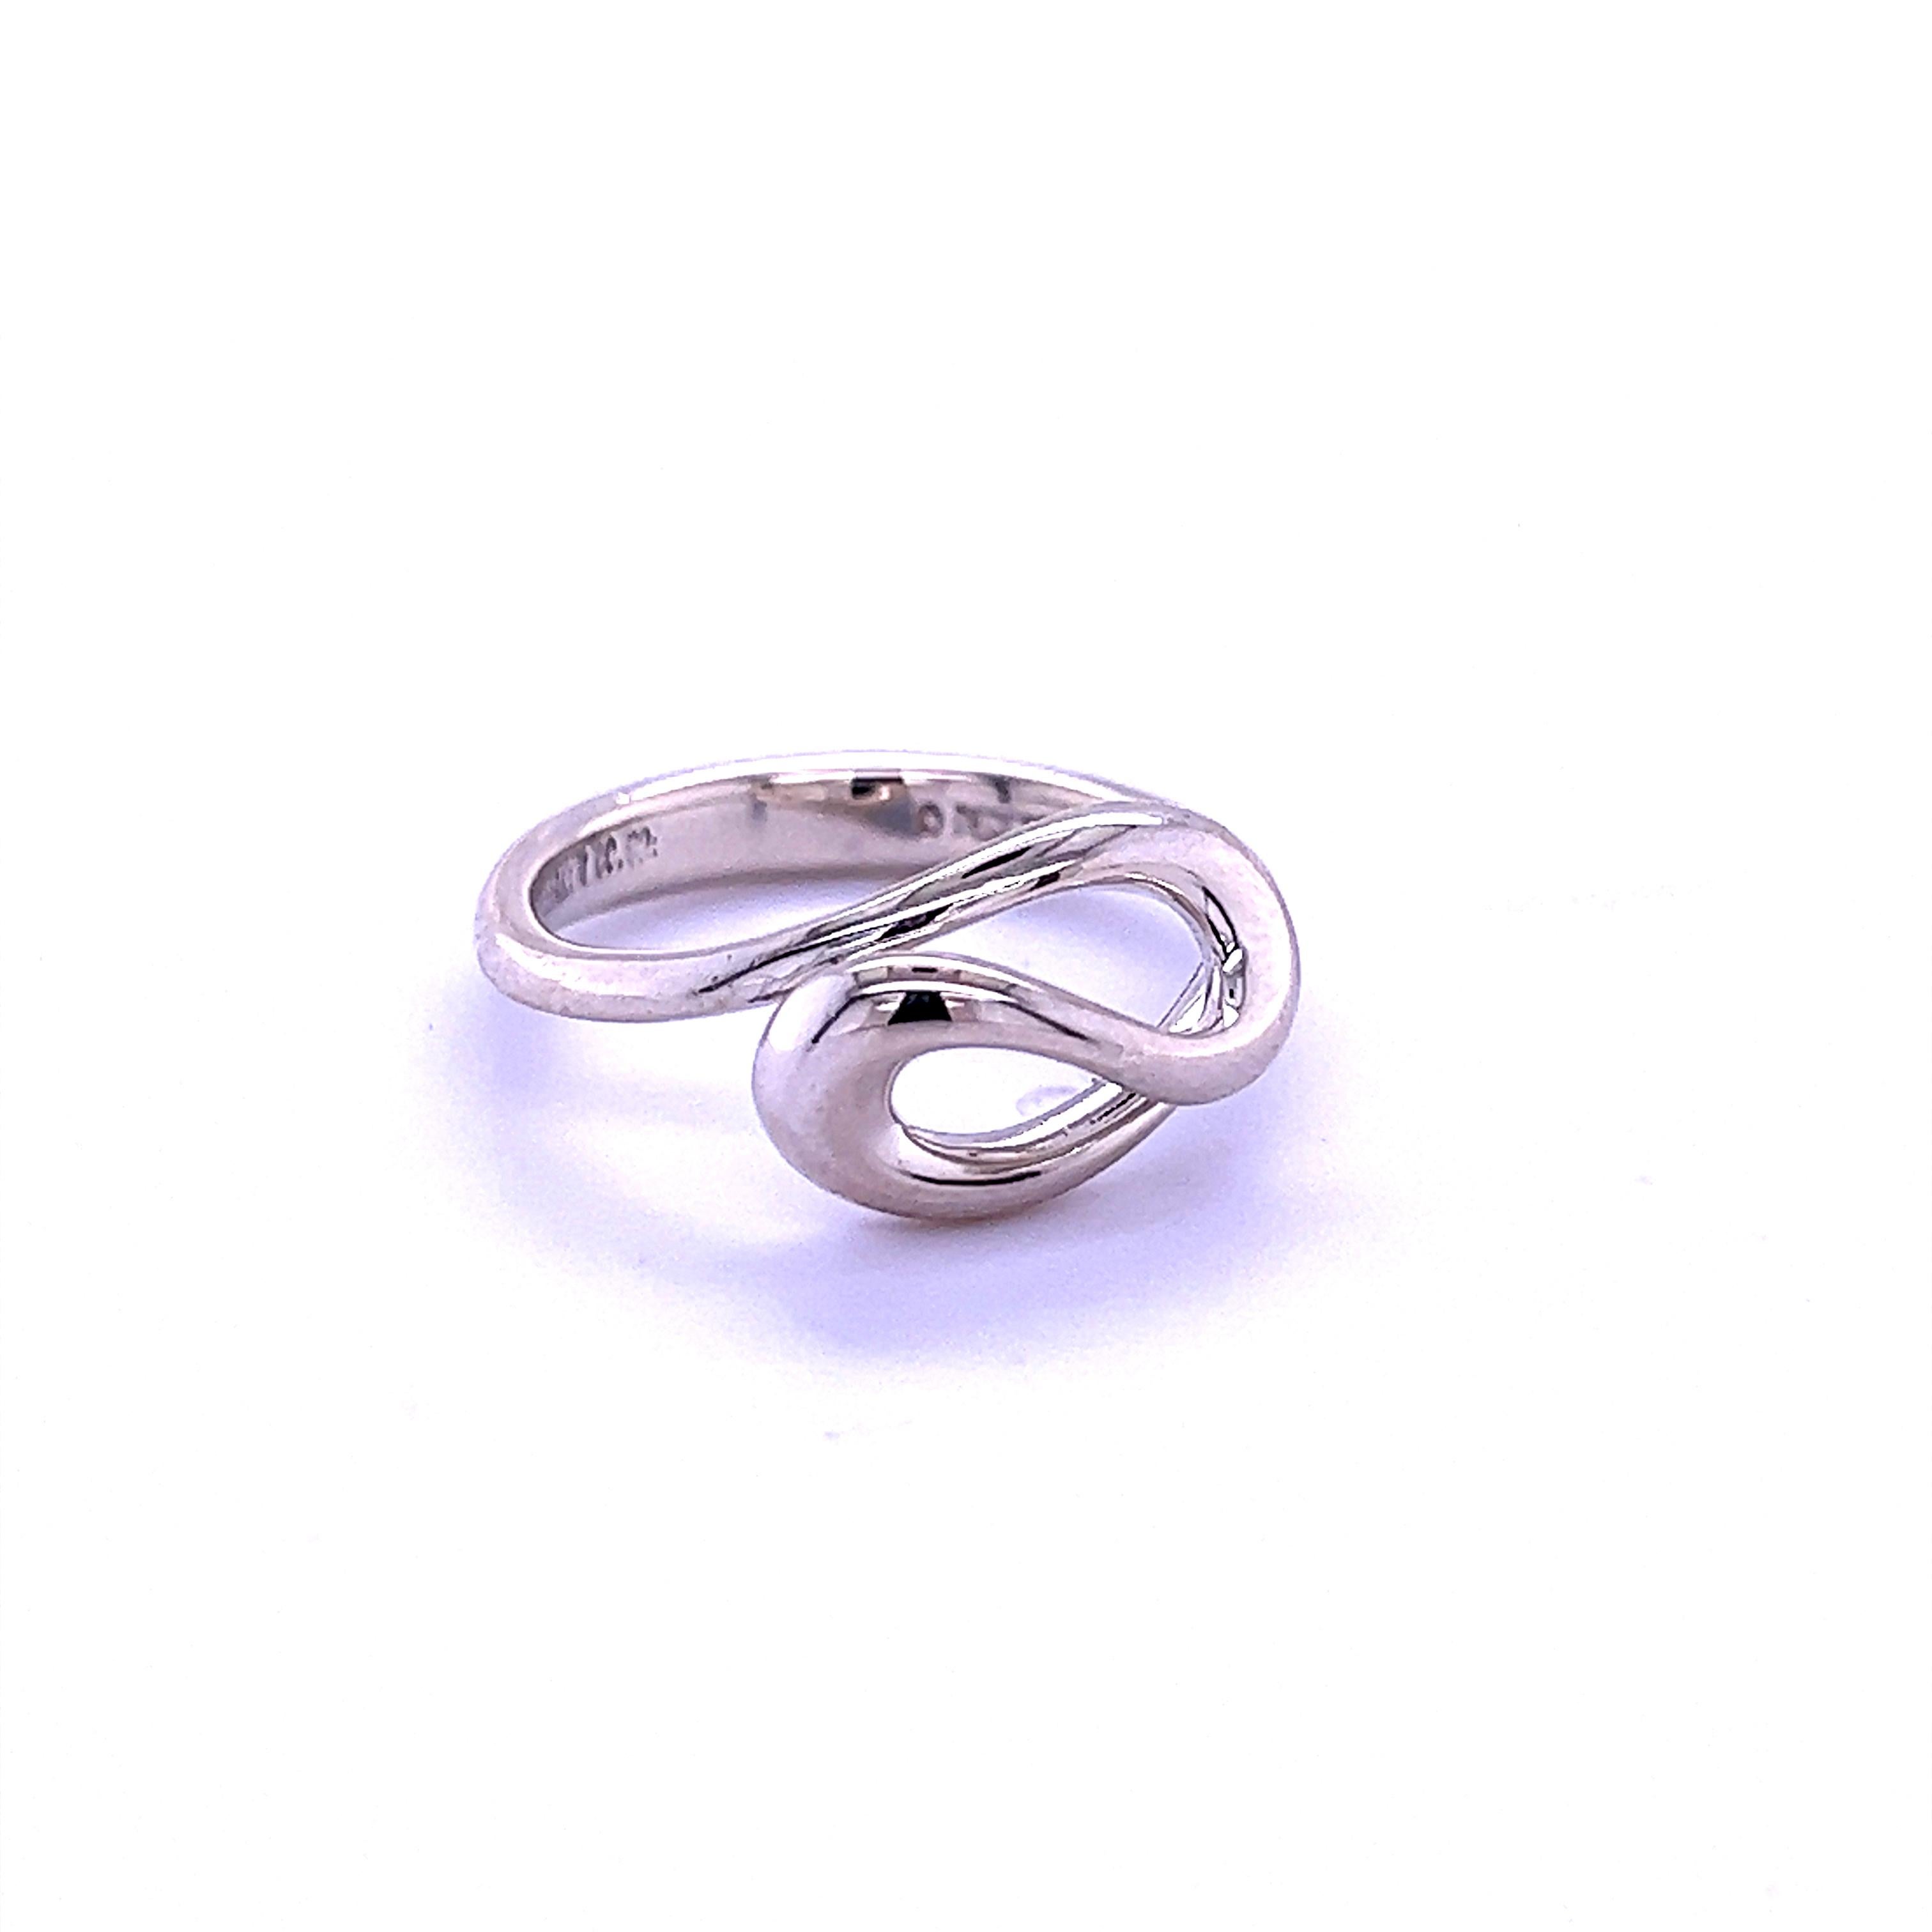 Tiffany & Co Estate Wave Ring Size 5.5 Silver By Elsa Peretti In Good Condition For Sale In Brooklyn, NY